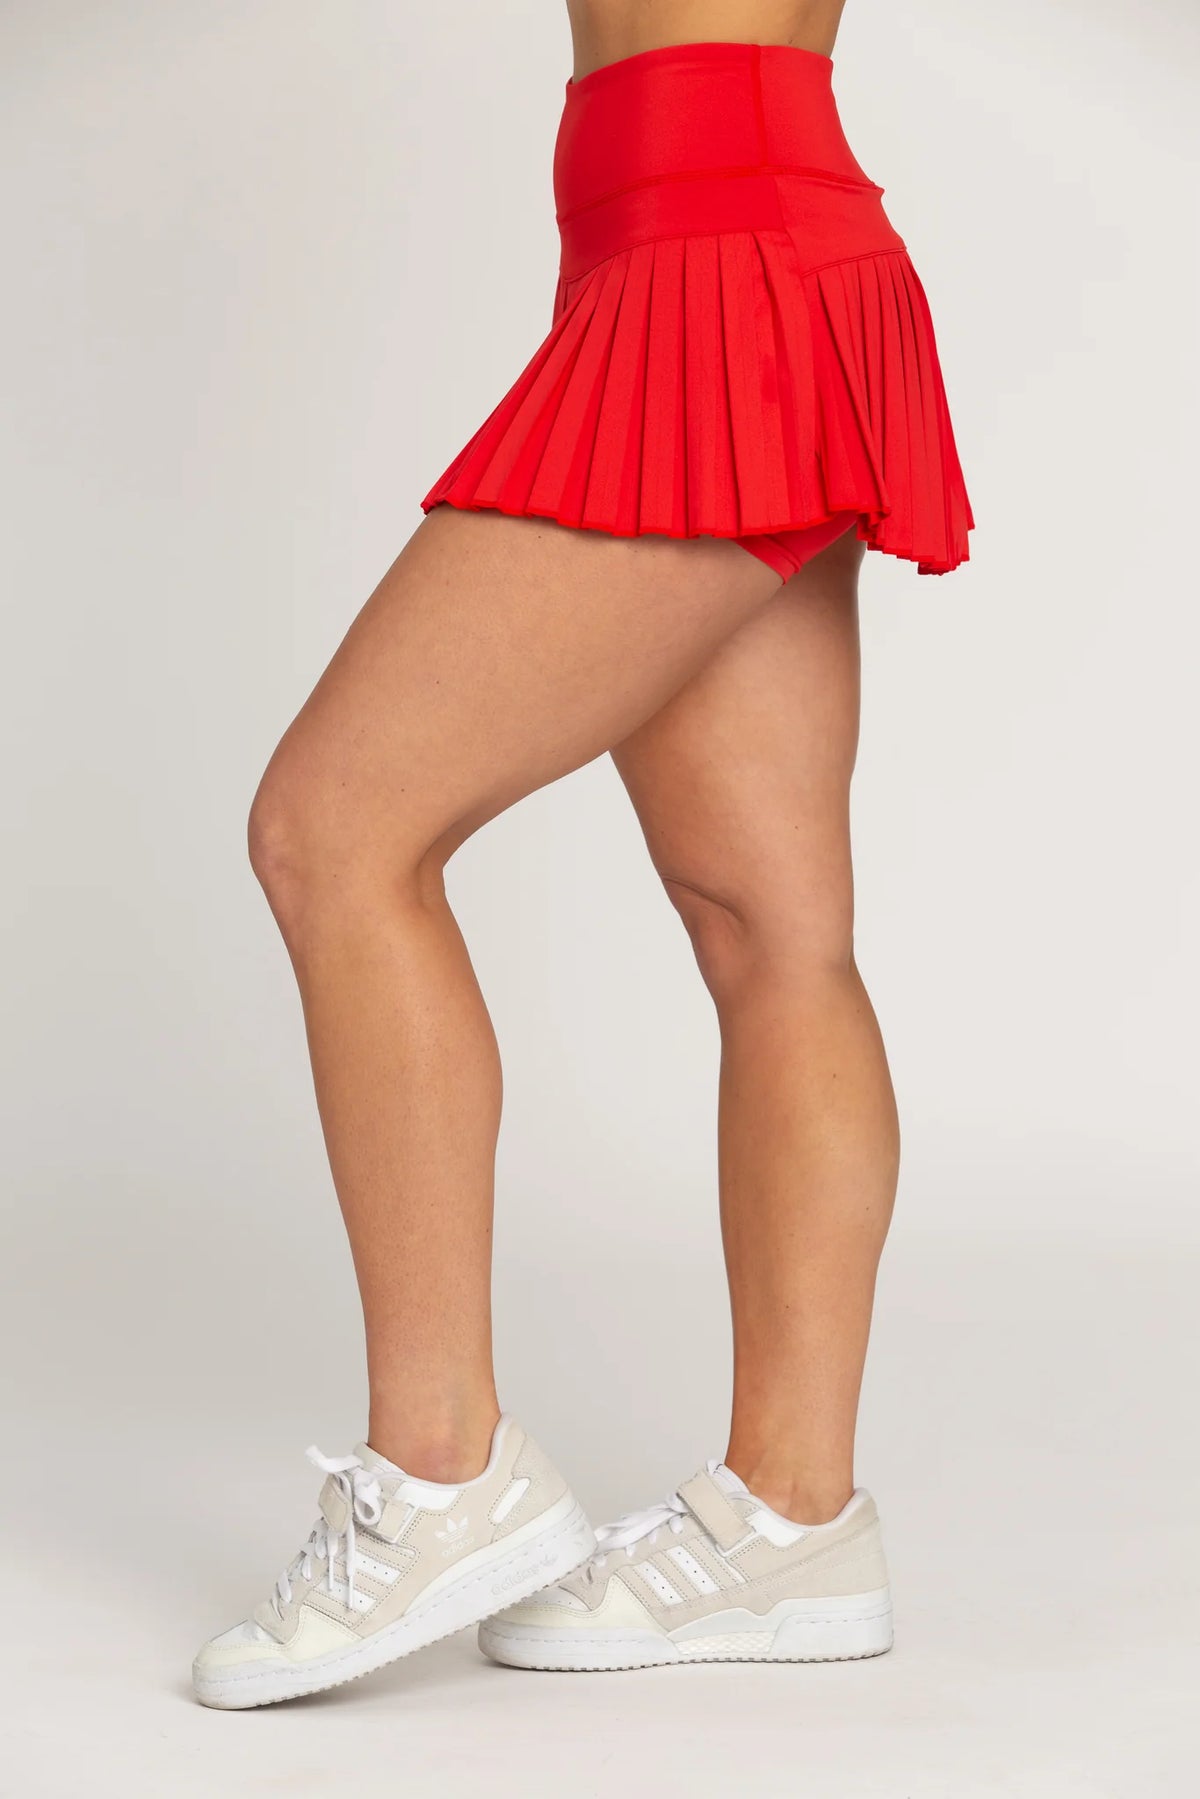 gold hinge pleated tennis skirt in candy red